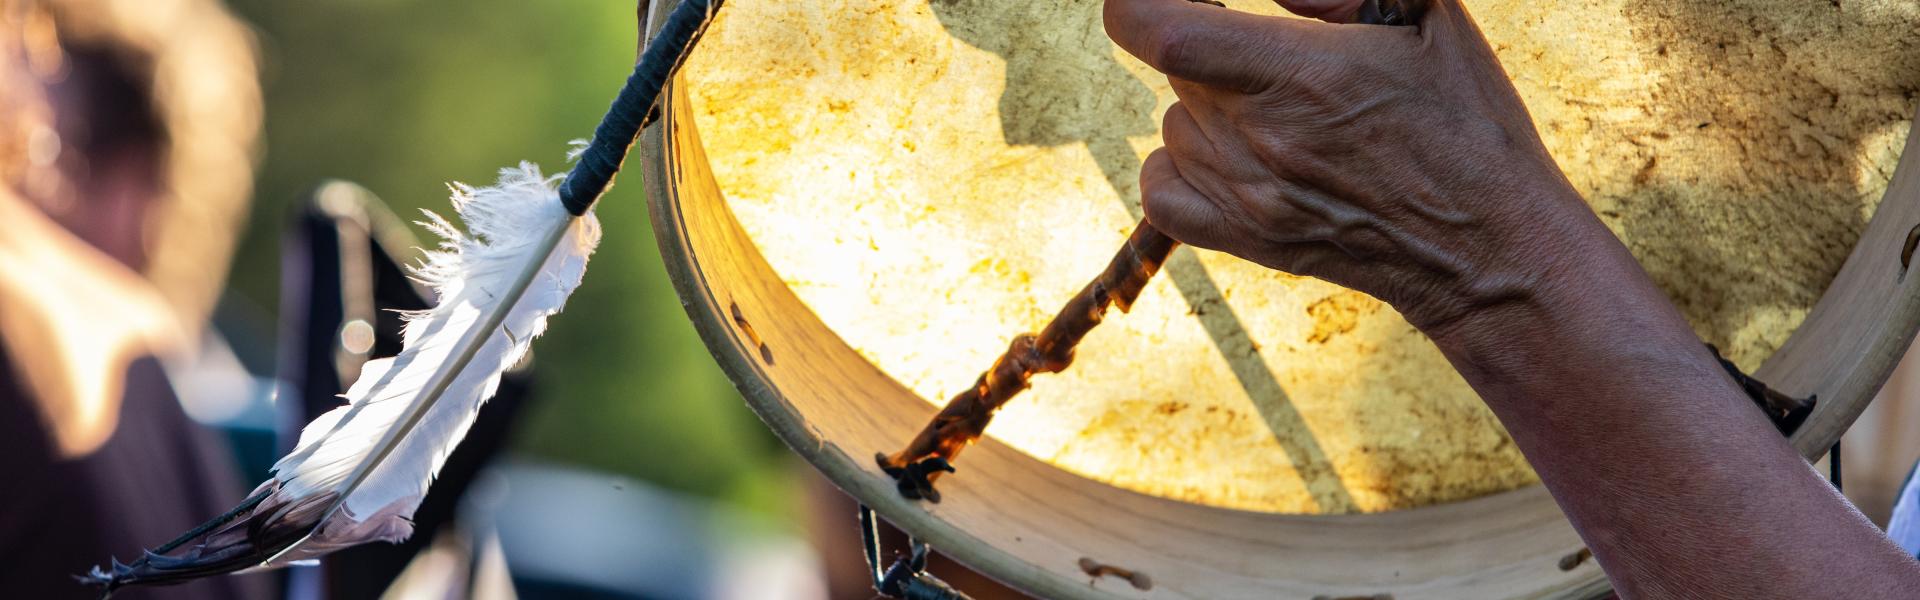 Traditionally constructed native drum is seen in the hands of a spiritual person with a sacred eagle feather during a park gig celebrating traditional music